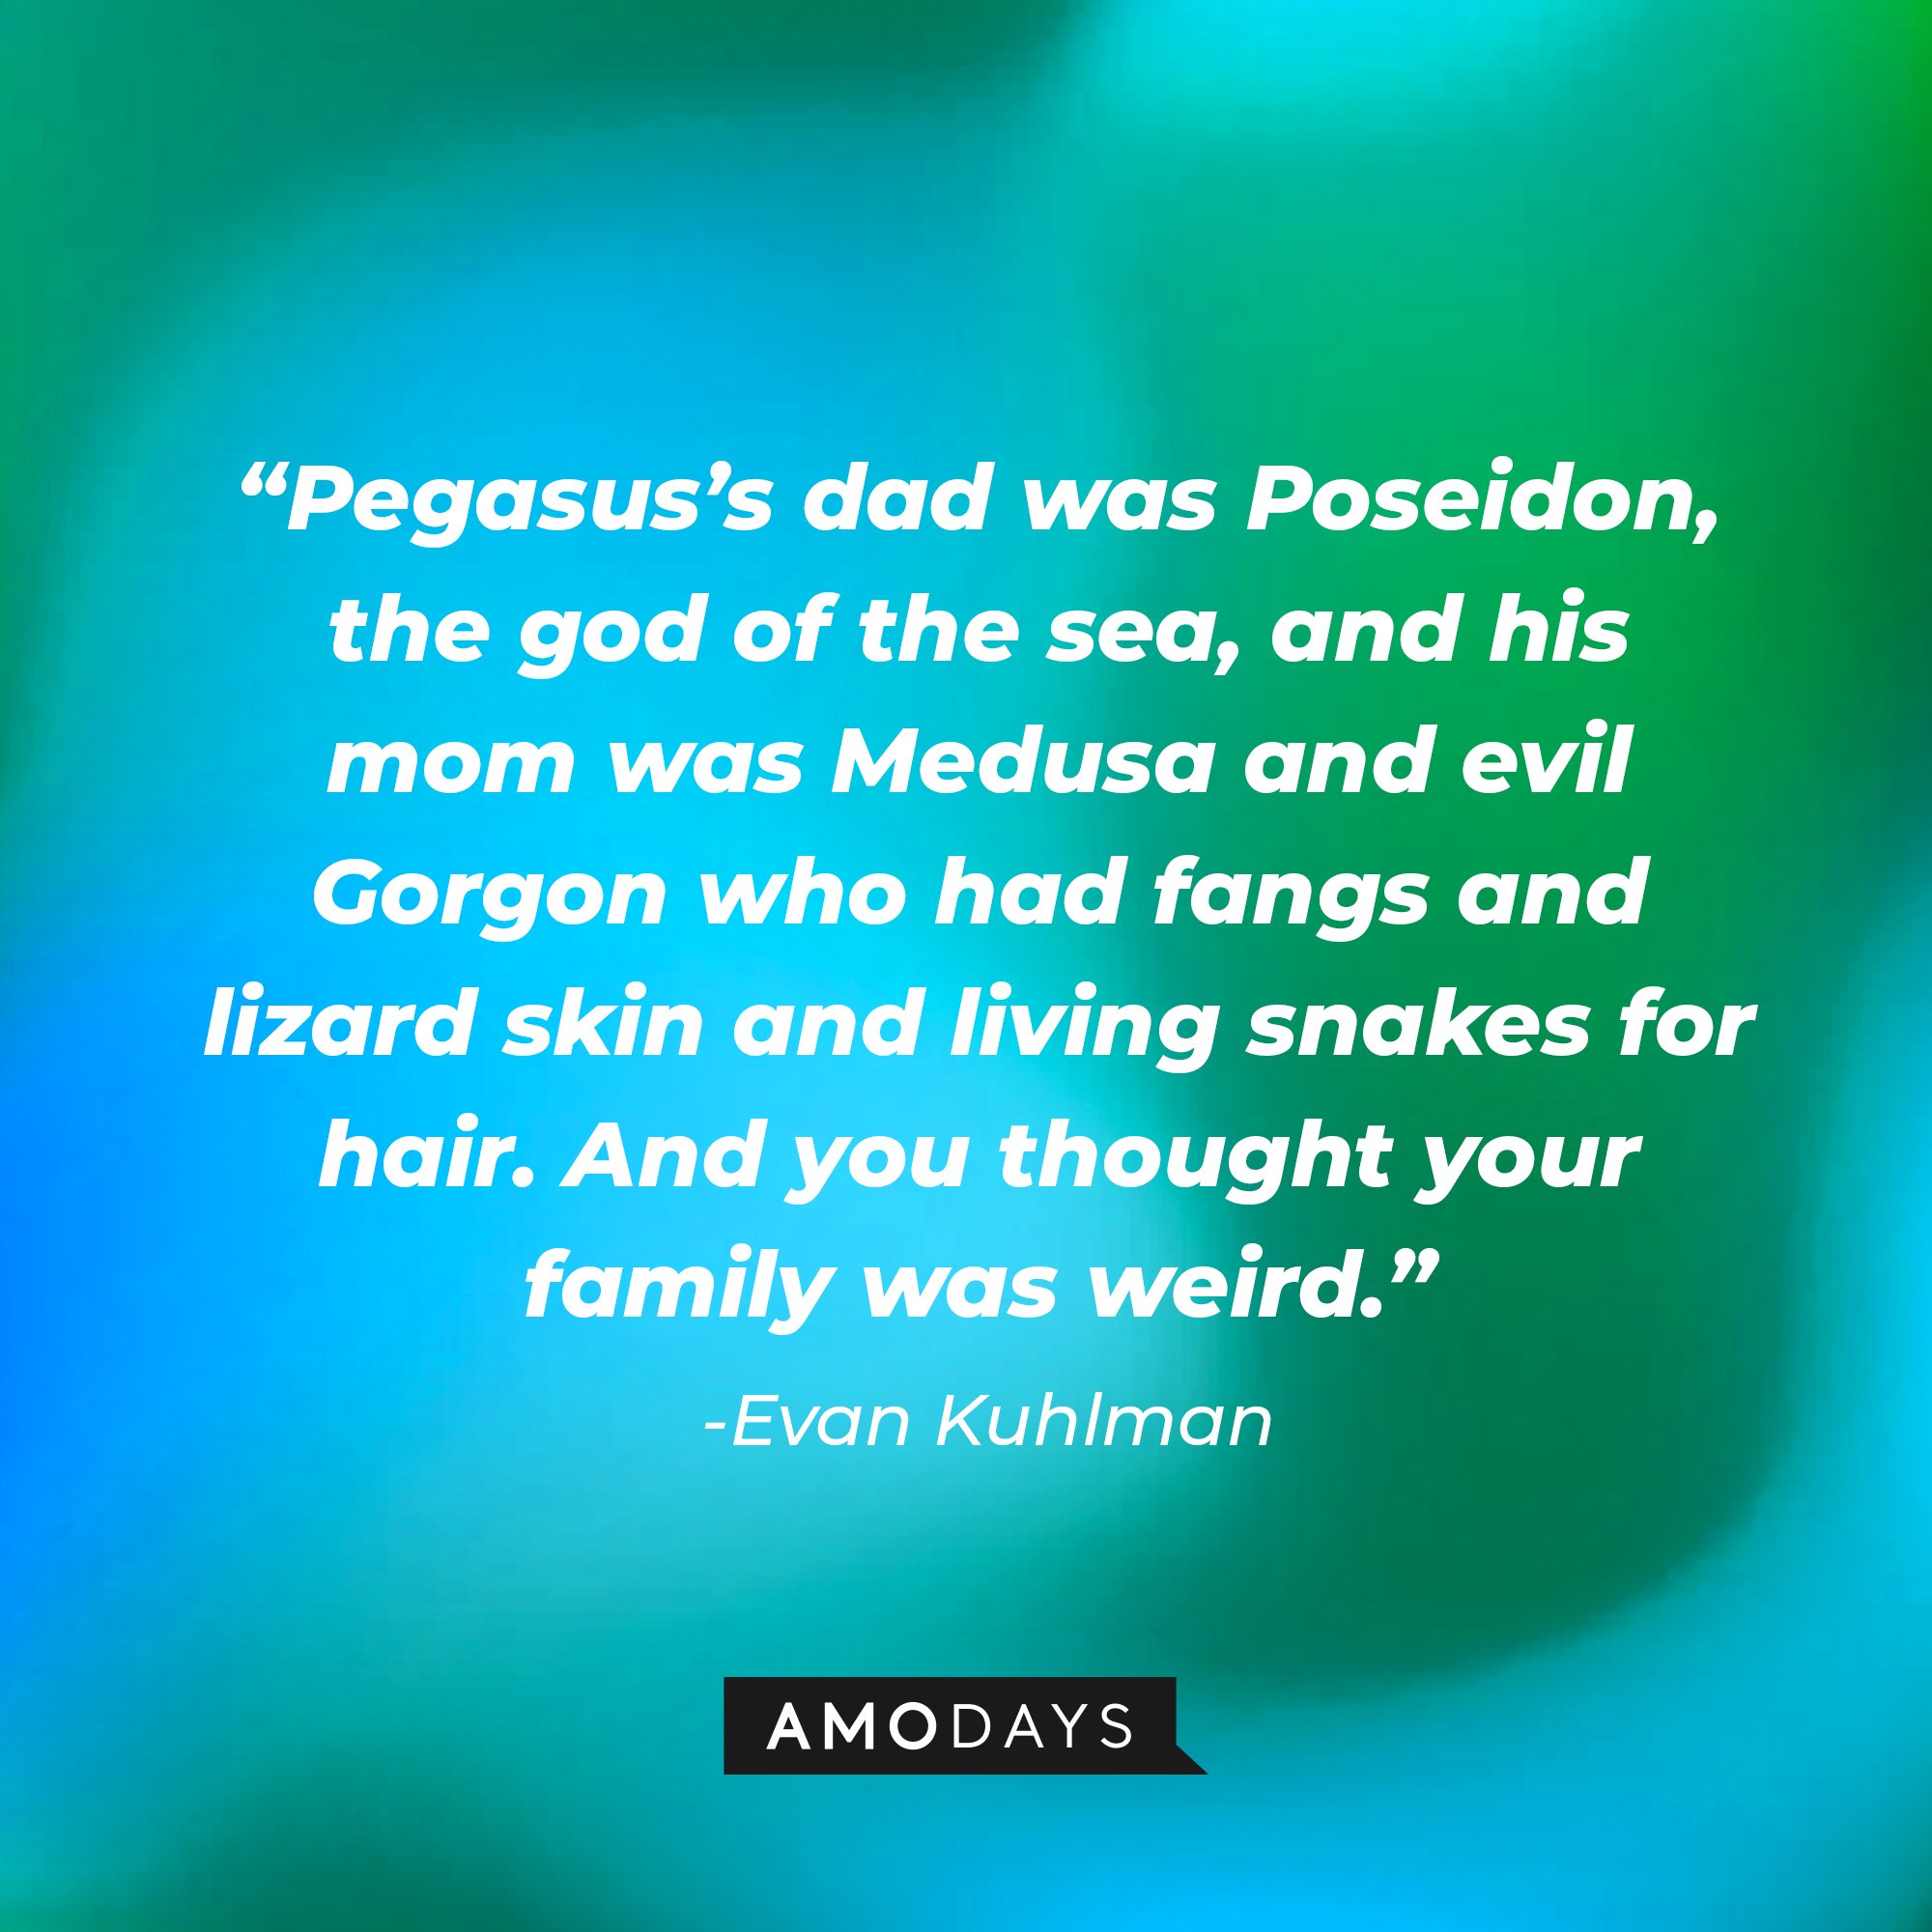  Evan Kuhlman’s quote: “Pegasus’s dad was Poseidon, the god of the sea, and his mom was Medusa and evil Gorgon who had fangs and lizard skin and living snakes for hair. And you thought your family was weird.” | Image: AmoDays